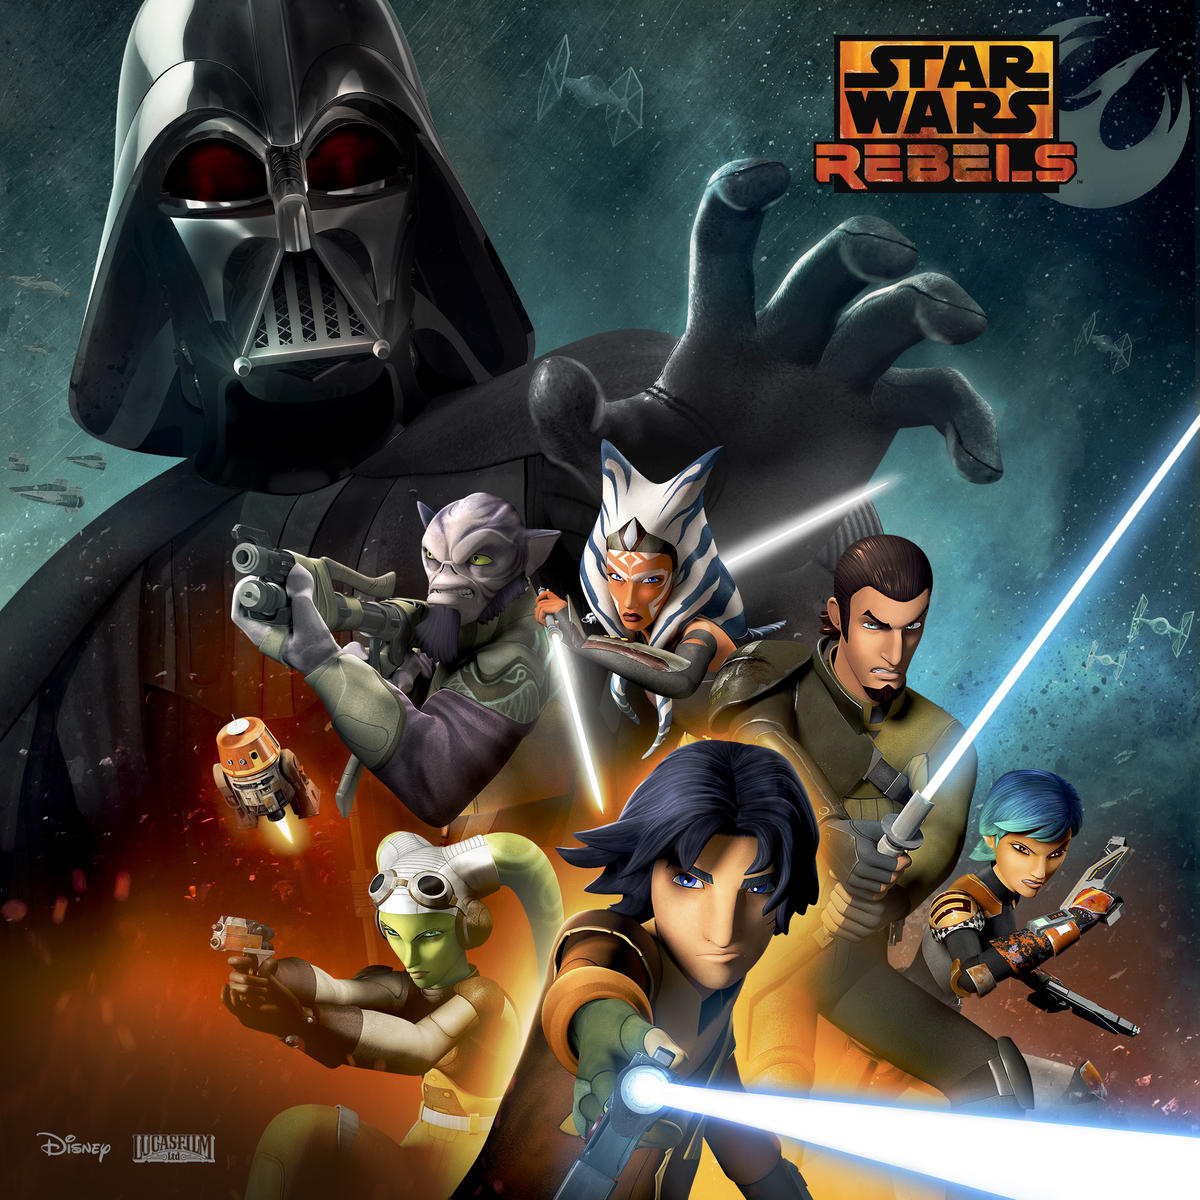 Pick Up Your Copy of 'Star Wars: Rebels Season 2' In August